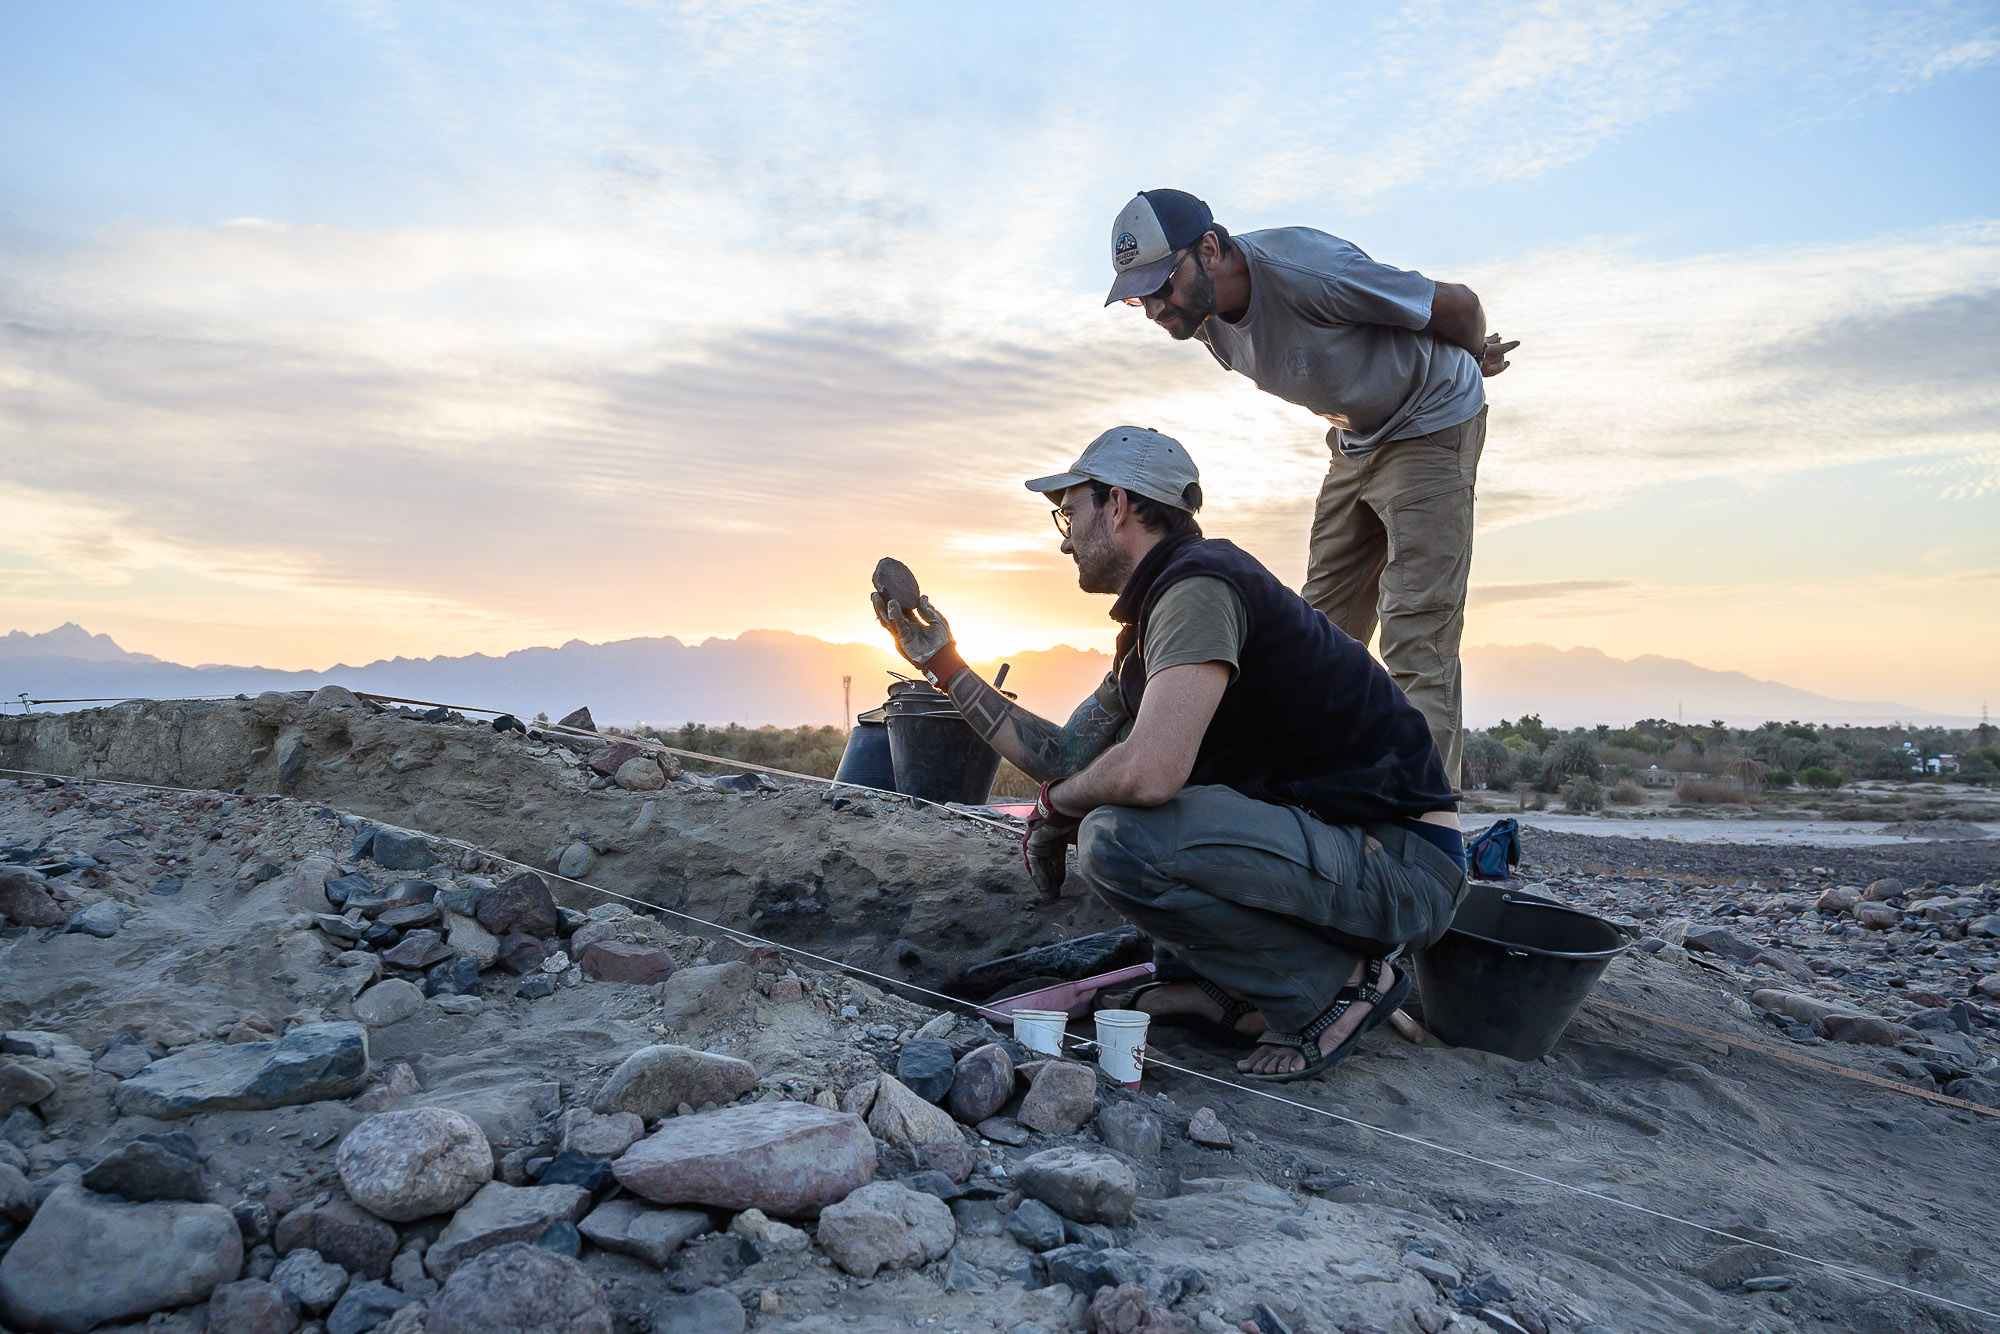 Arabie Saoudite. Al-Bad. Yamandu Hilbert et Remy Crassard s'interrogent devant un objet lithique.Arabie Saoudite. Archeological mission of Al-Bad'. The prehistorians Yamandu Hilbert and Remy Crassard watching a lithic object they have just discovered.